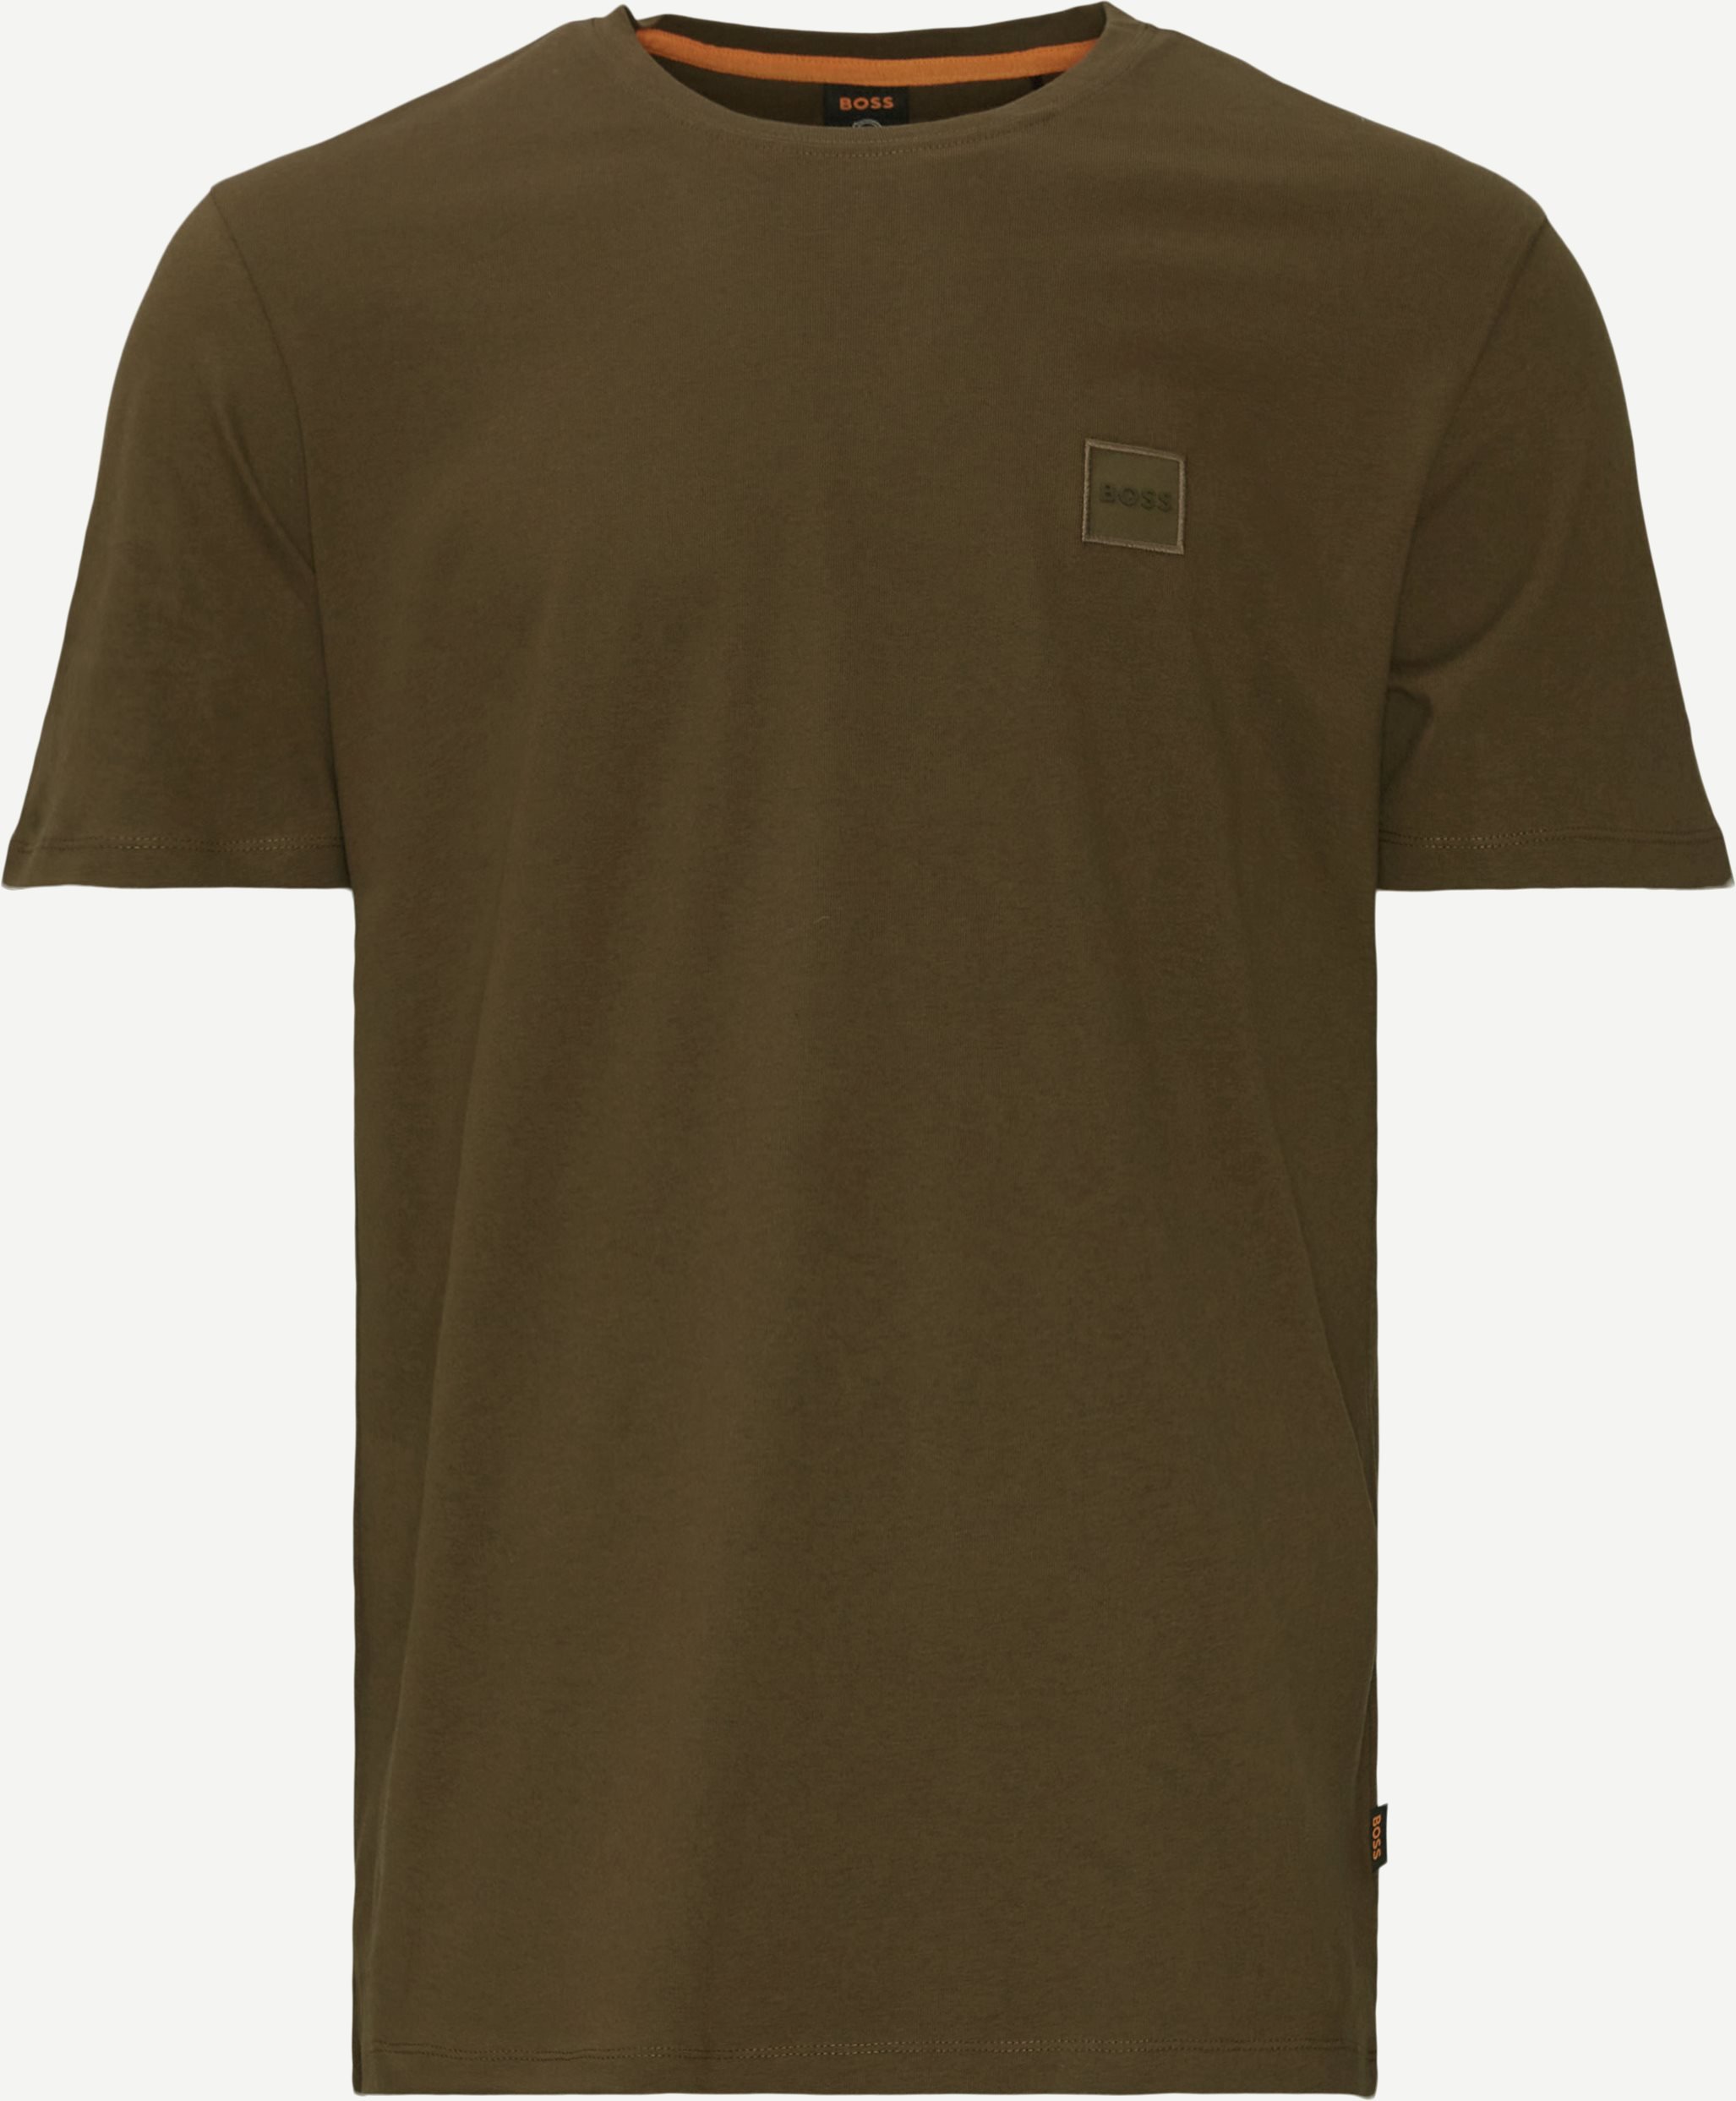 Tales T-shirt - T-shirts - Relaxed fit - Army